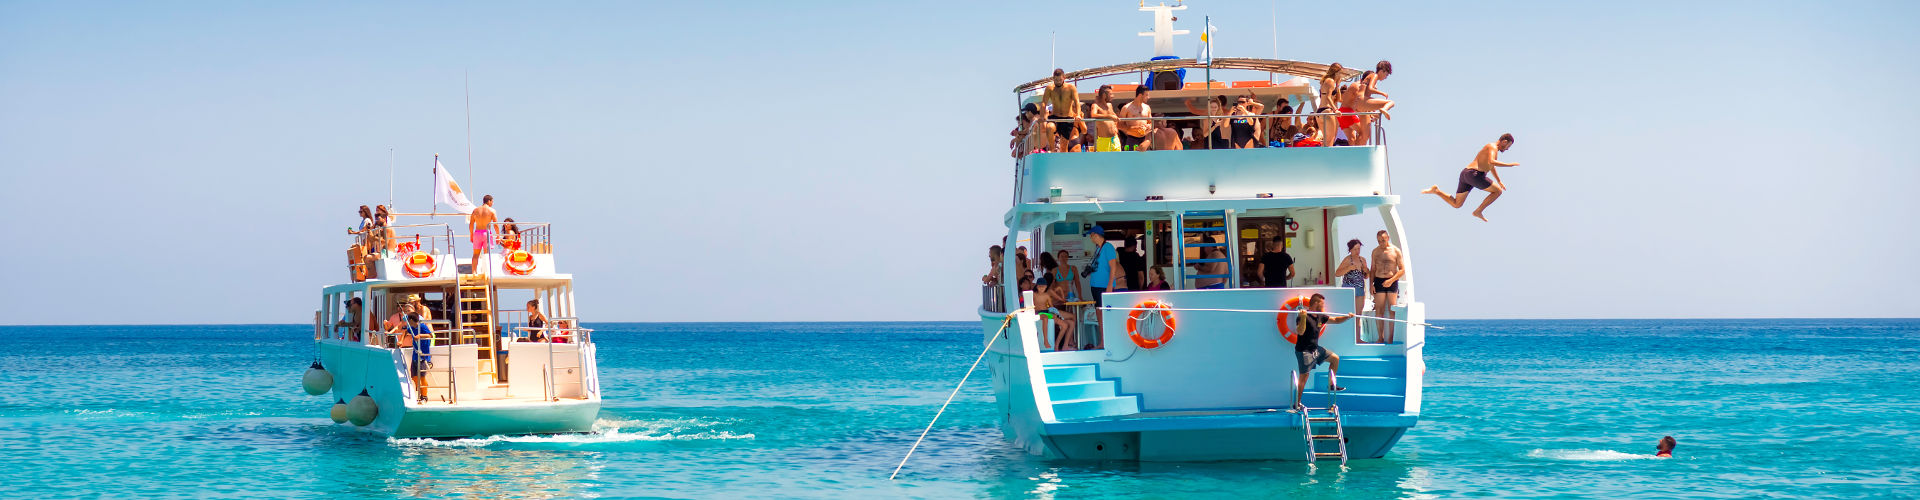 Summer Vacation Cruise Payment Processing